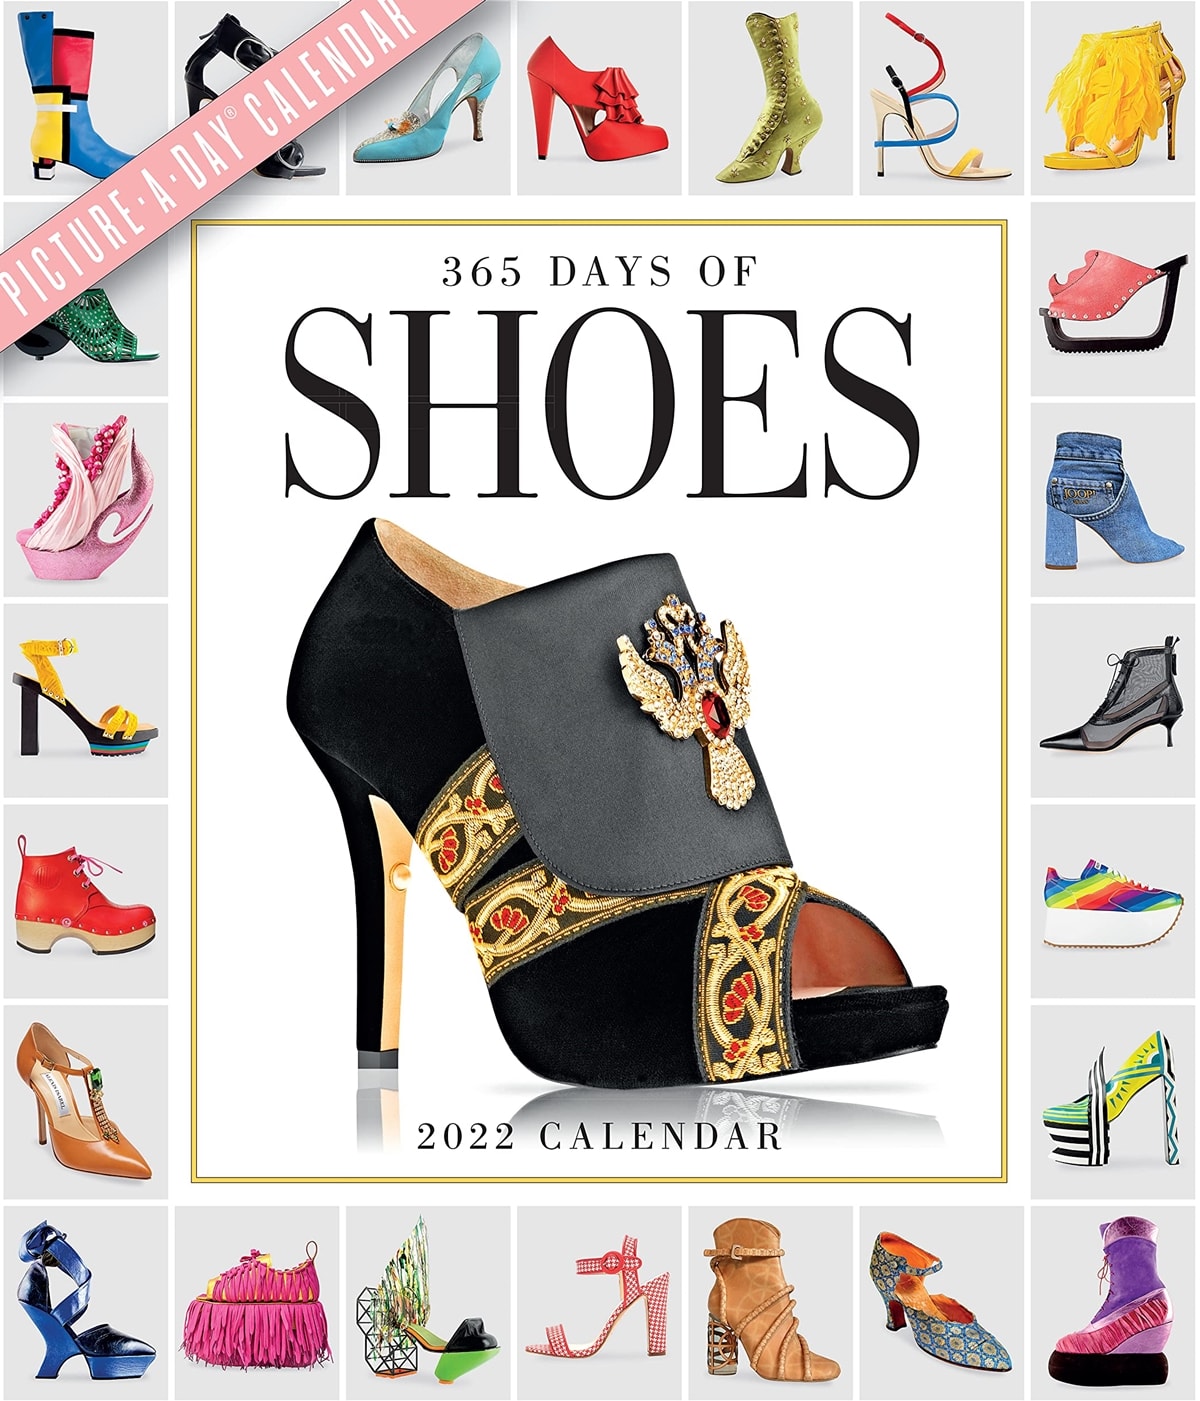 365 Days of Shoes features footwear ranging from the sexy to the prim, the flashy to the polished—kitten heels from Manolo Blahnik